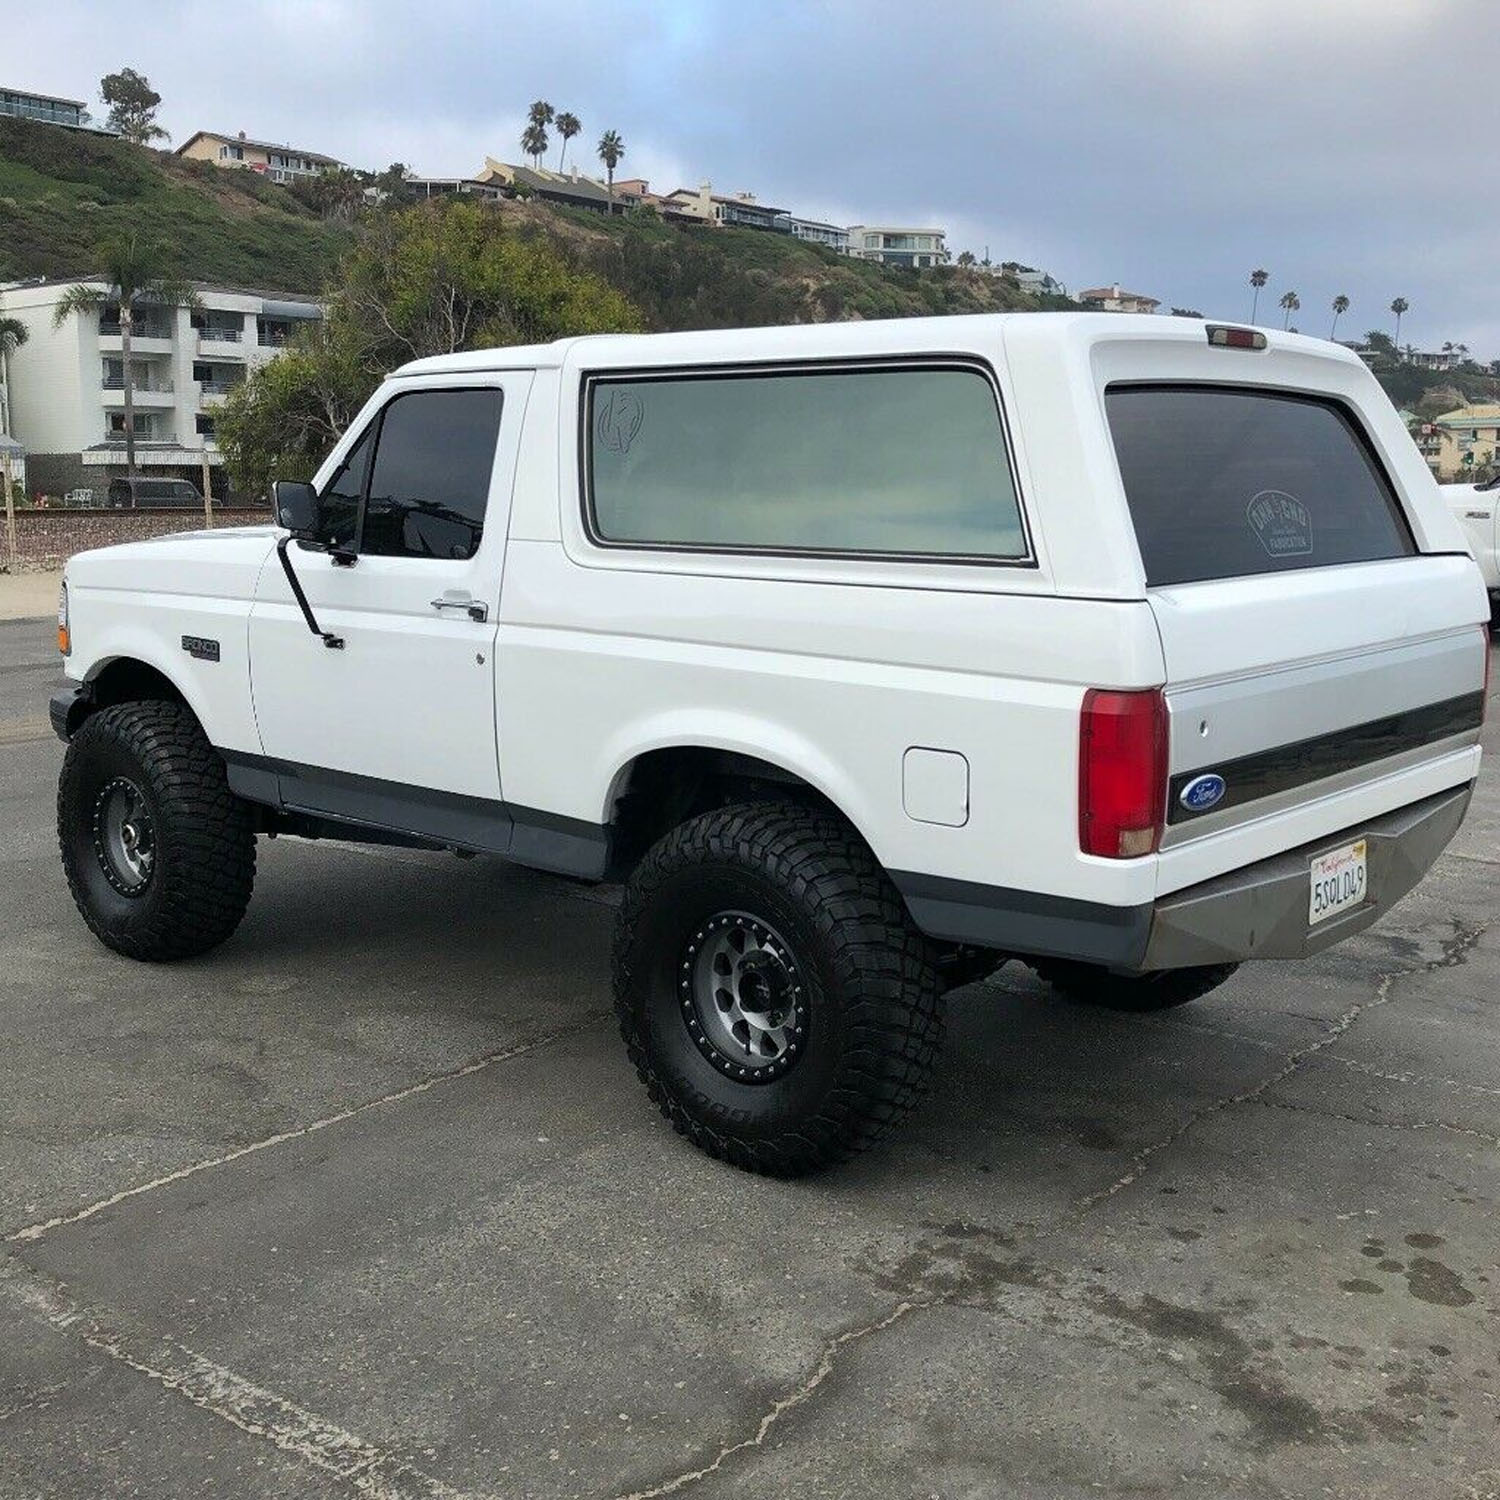 1992 Ford Bronco Prerunner Wants To Play In The Sand